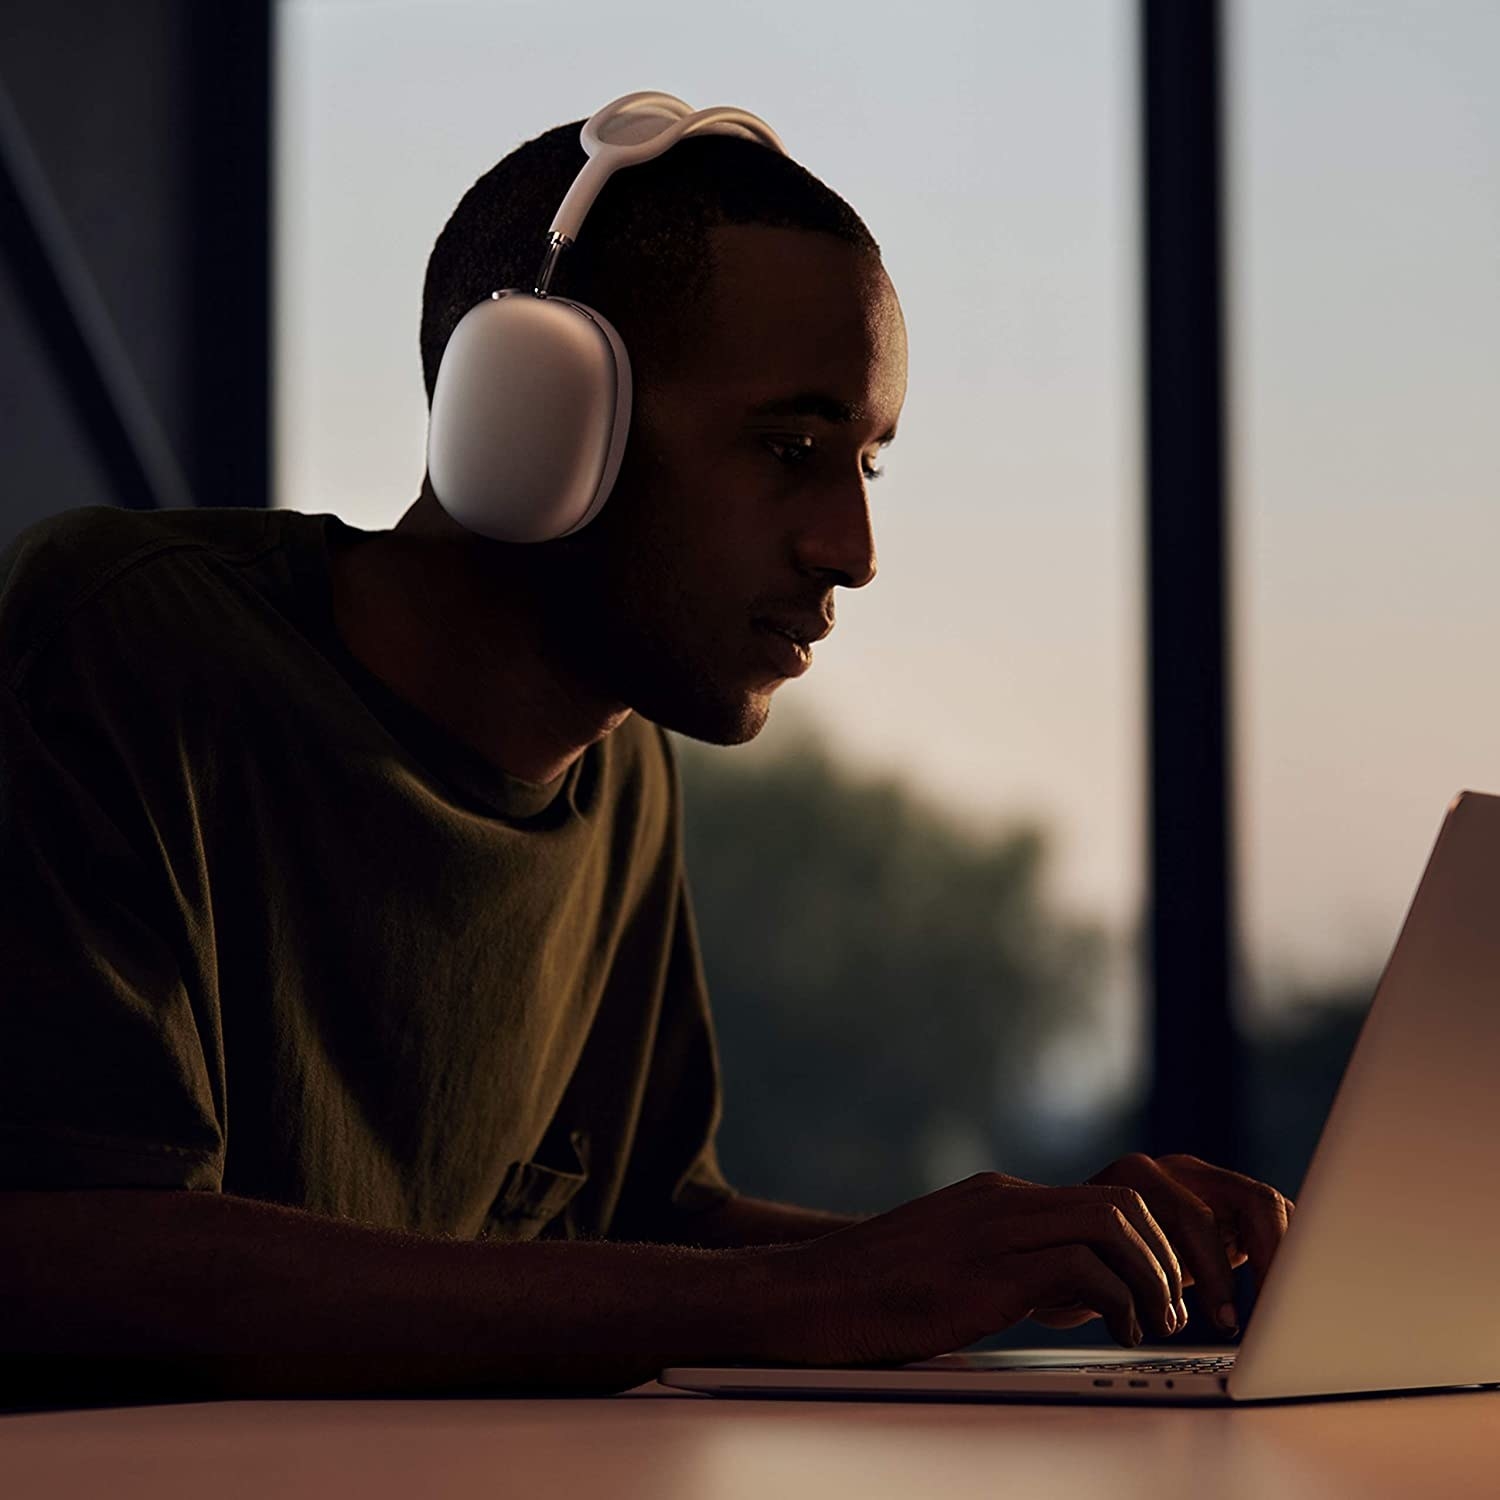 A person wearing the headphones while working on a computer